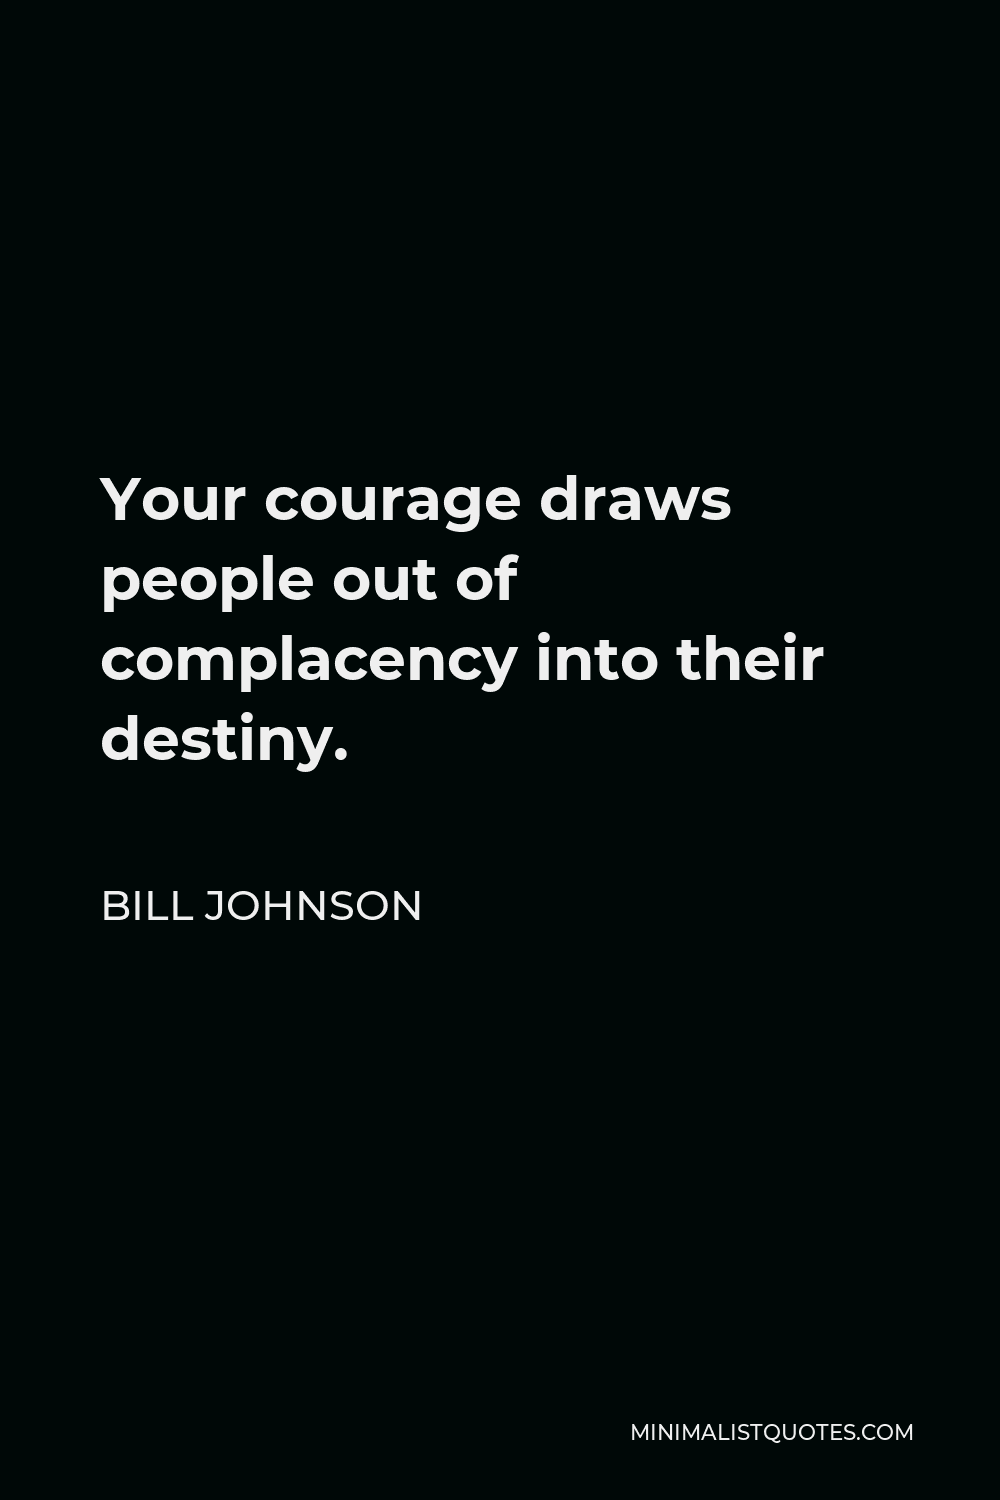 Bill Johnson Quote - Your courage draws people out of complacency into their destiny.